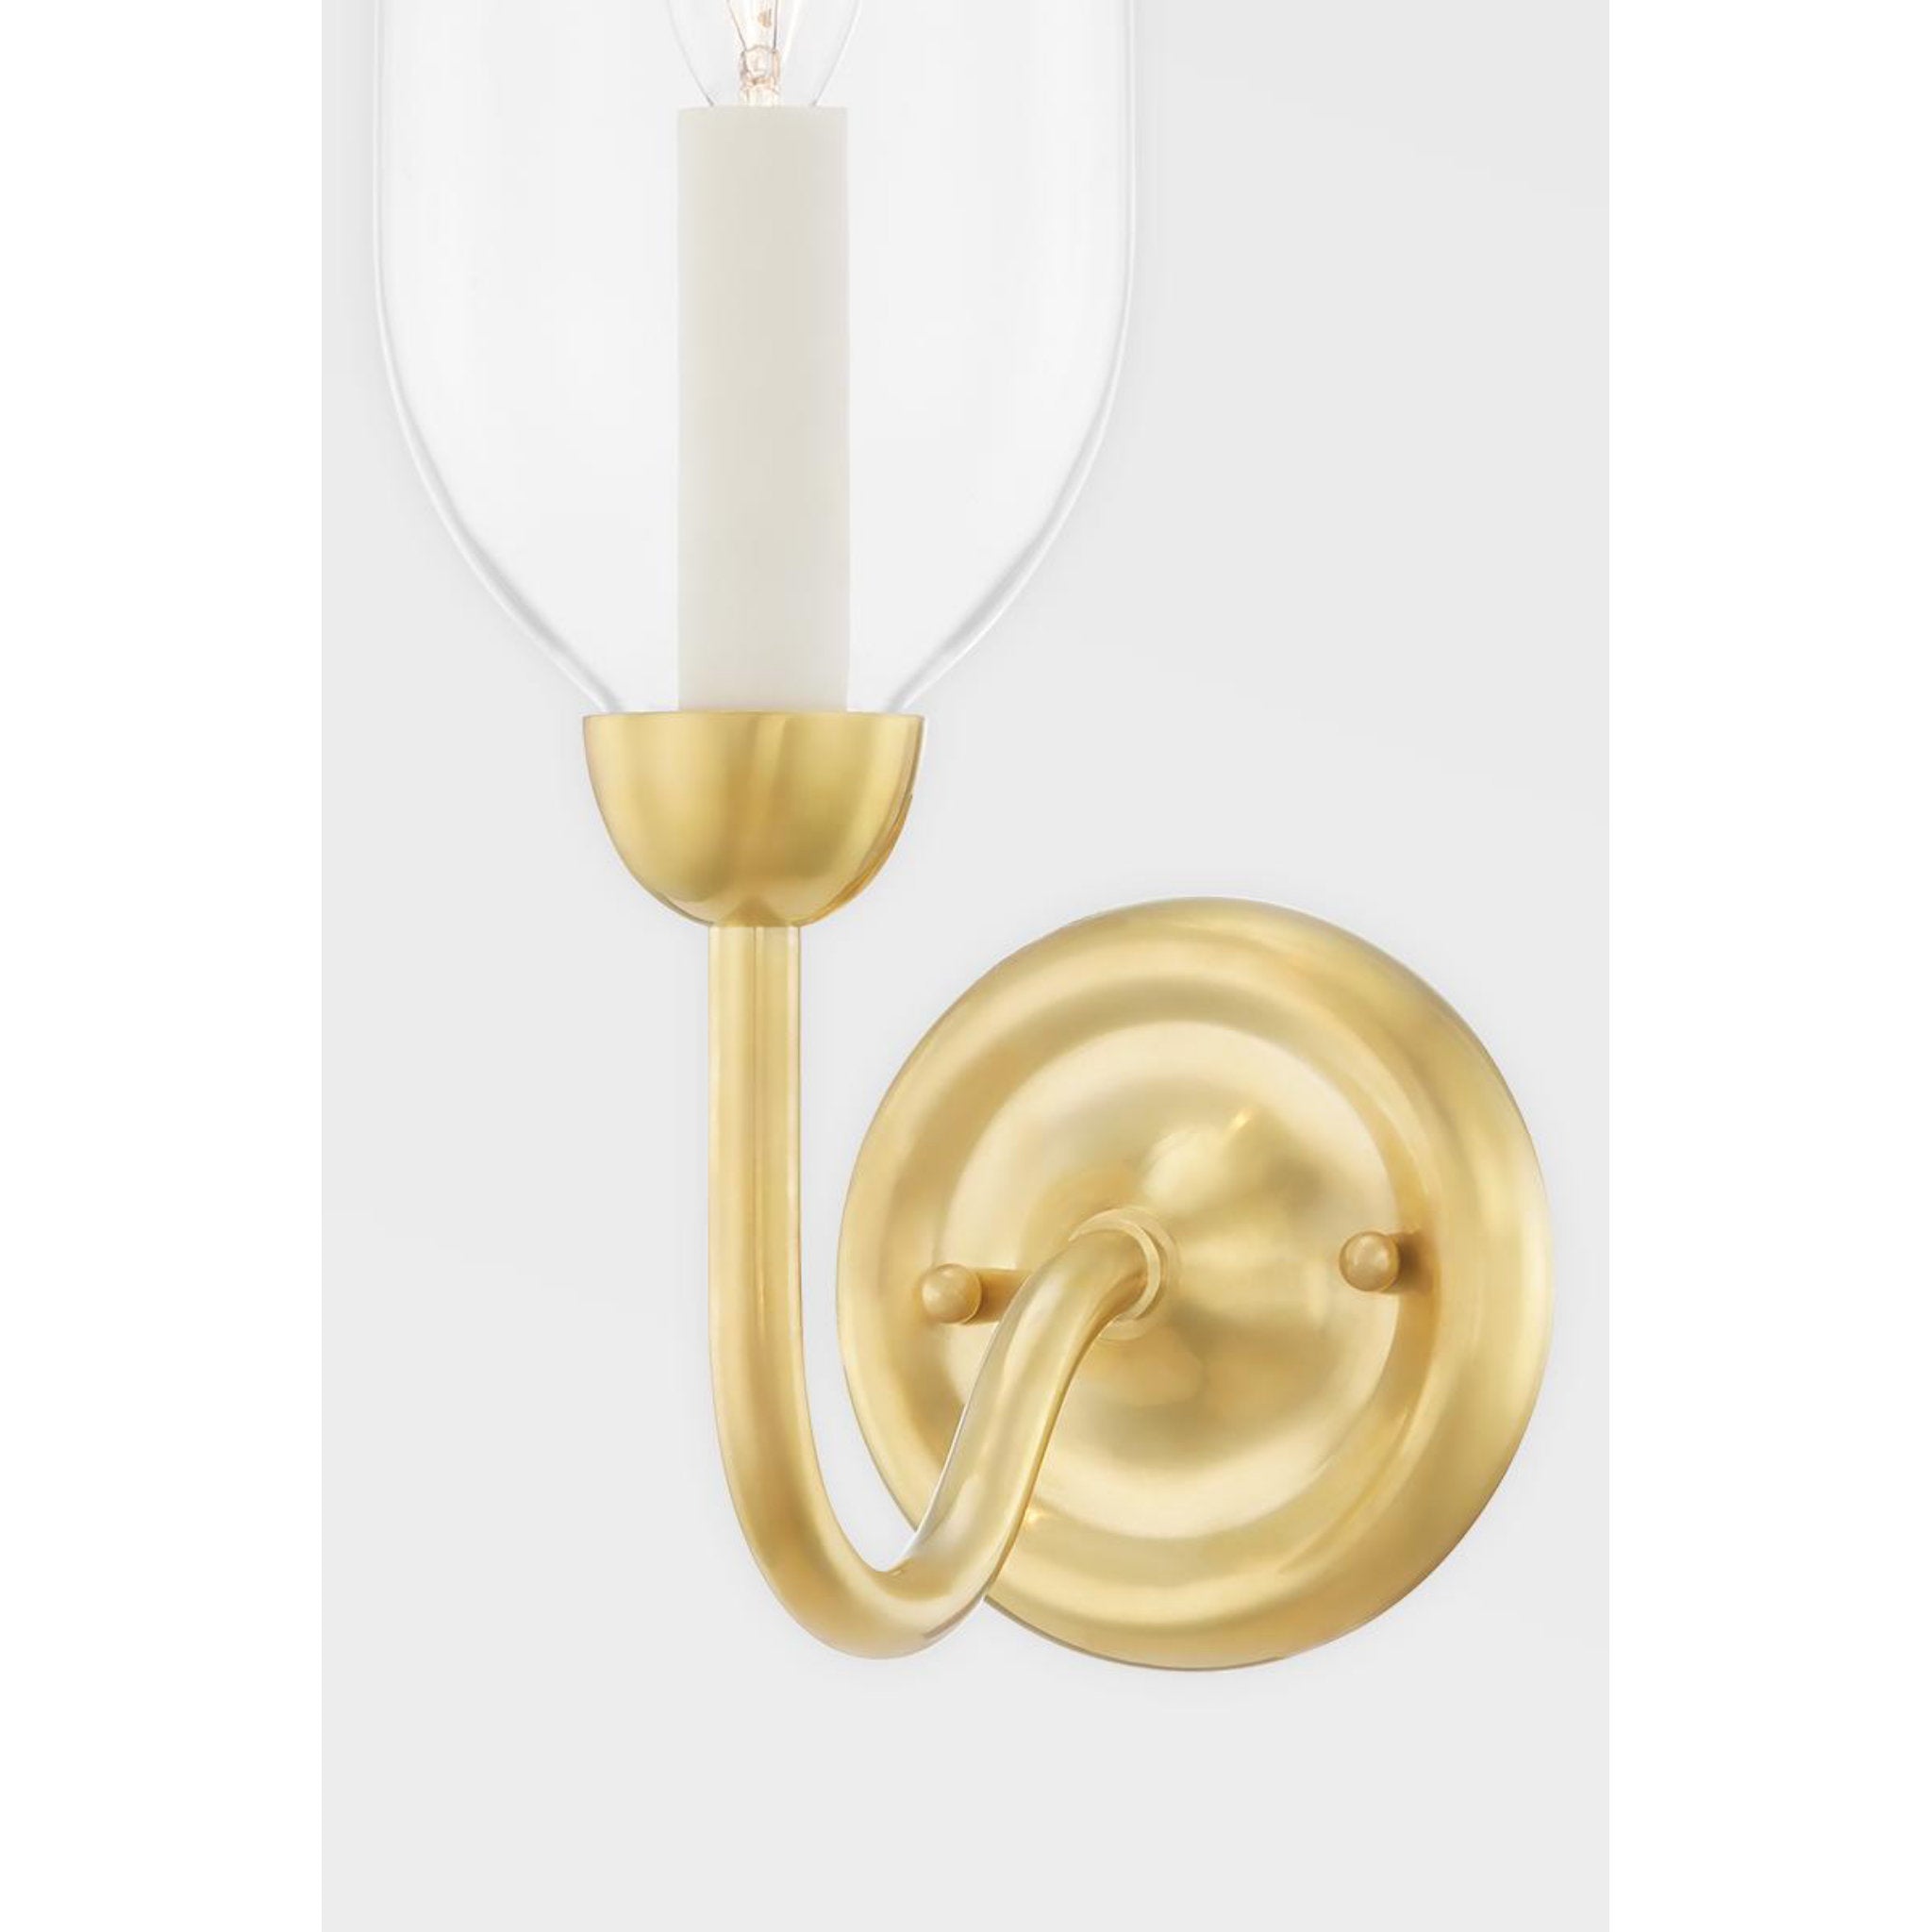 Classic No.1 1 Light Wall Sconce in Polished Nickel by Mark D. Sikes